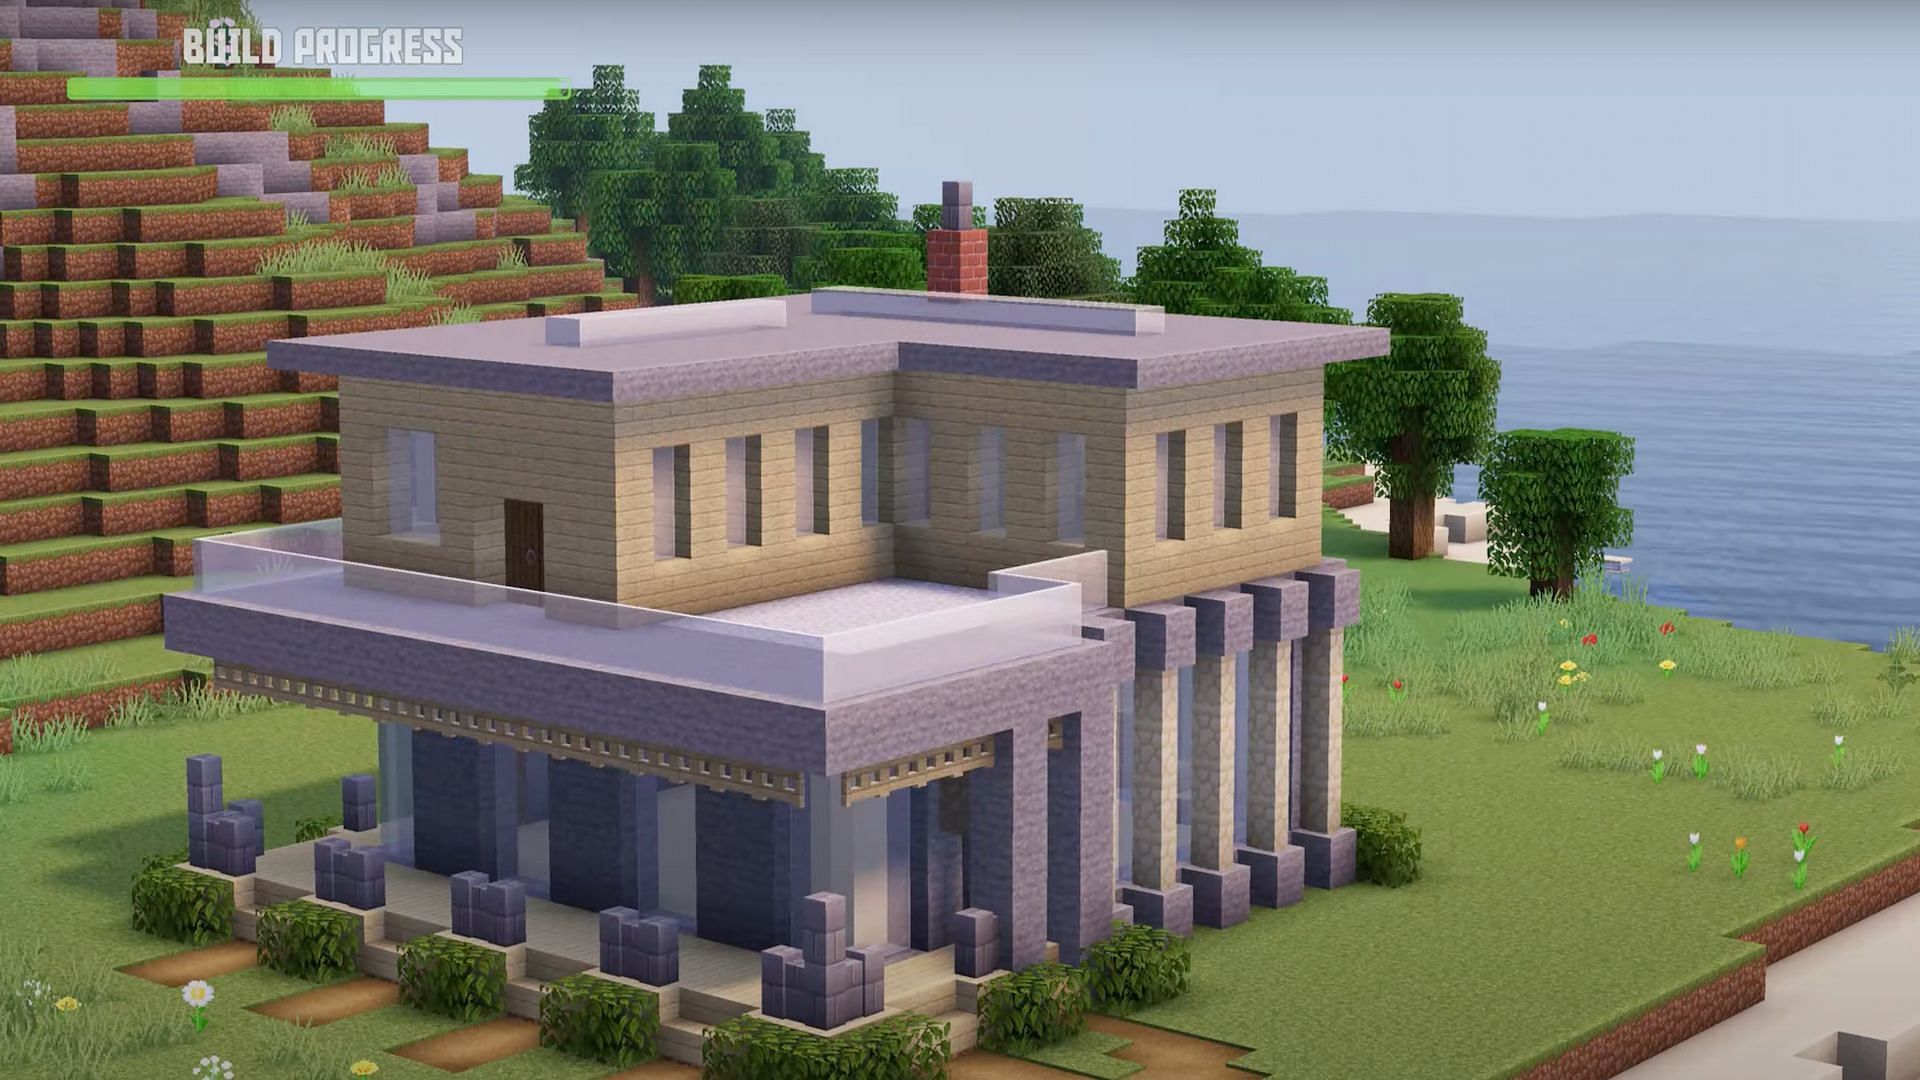 Once Minecraft players have added all the finishing touches, it's time to add the roof (Image via Greg Builds/YouTube)